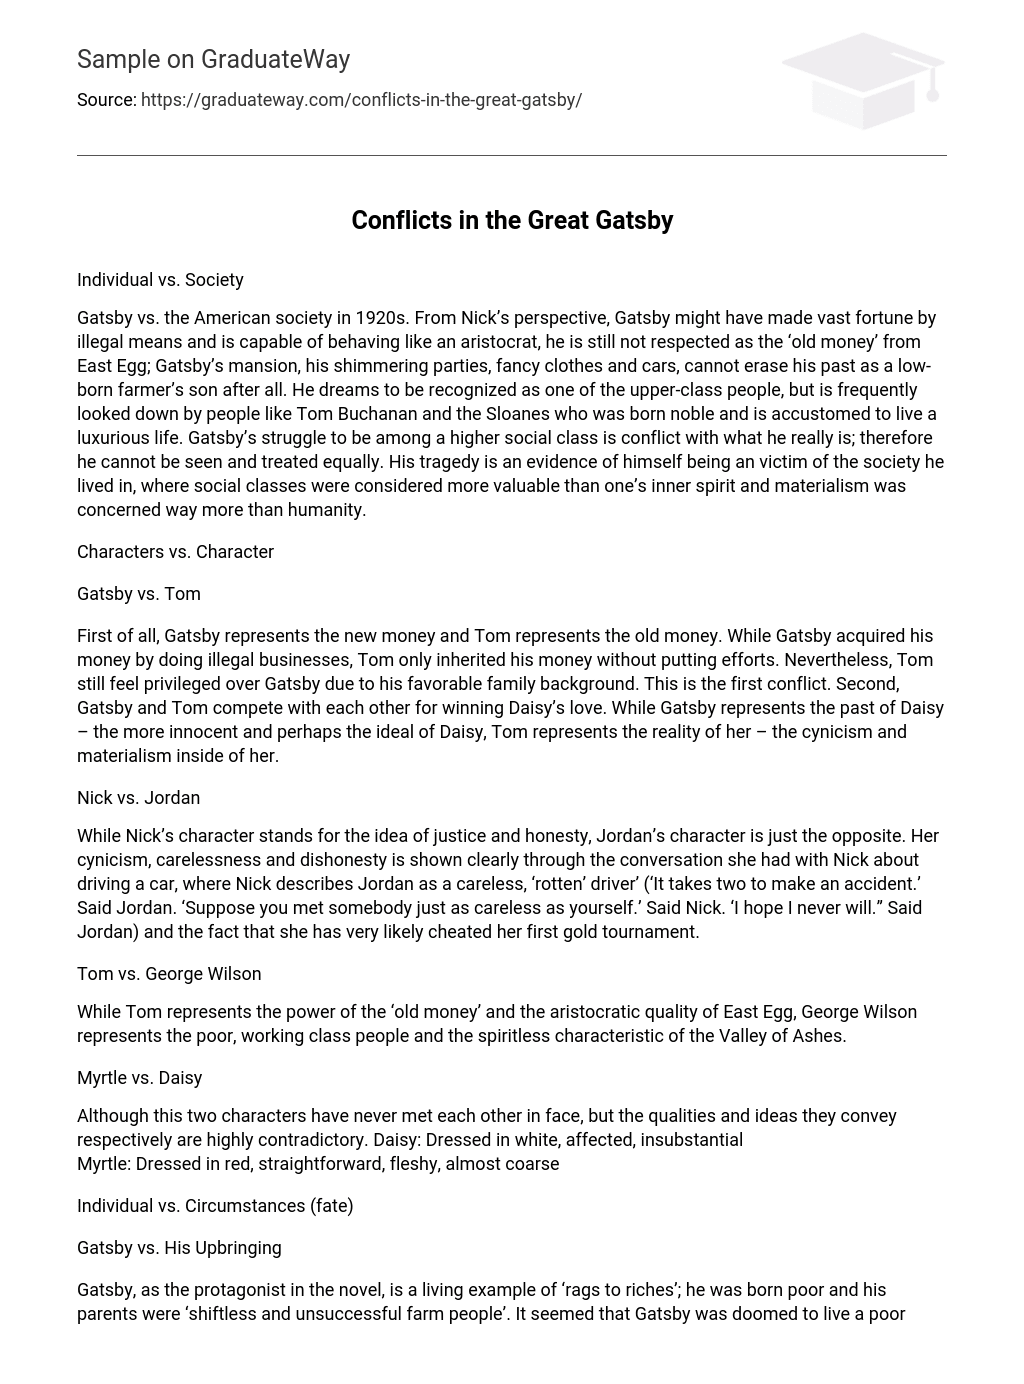 Conflicts in the Great Gatsby